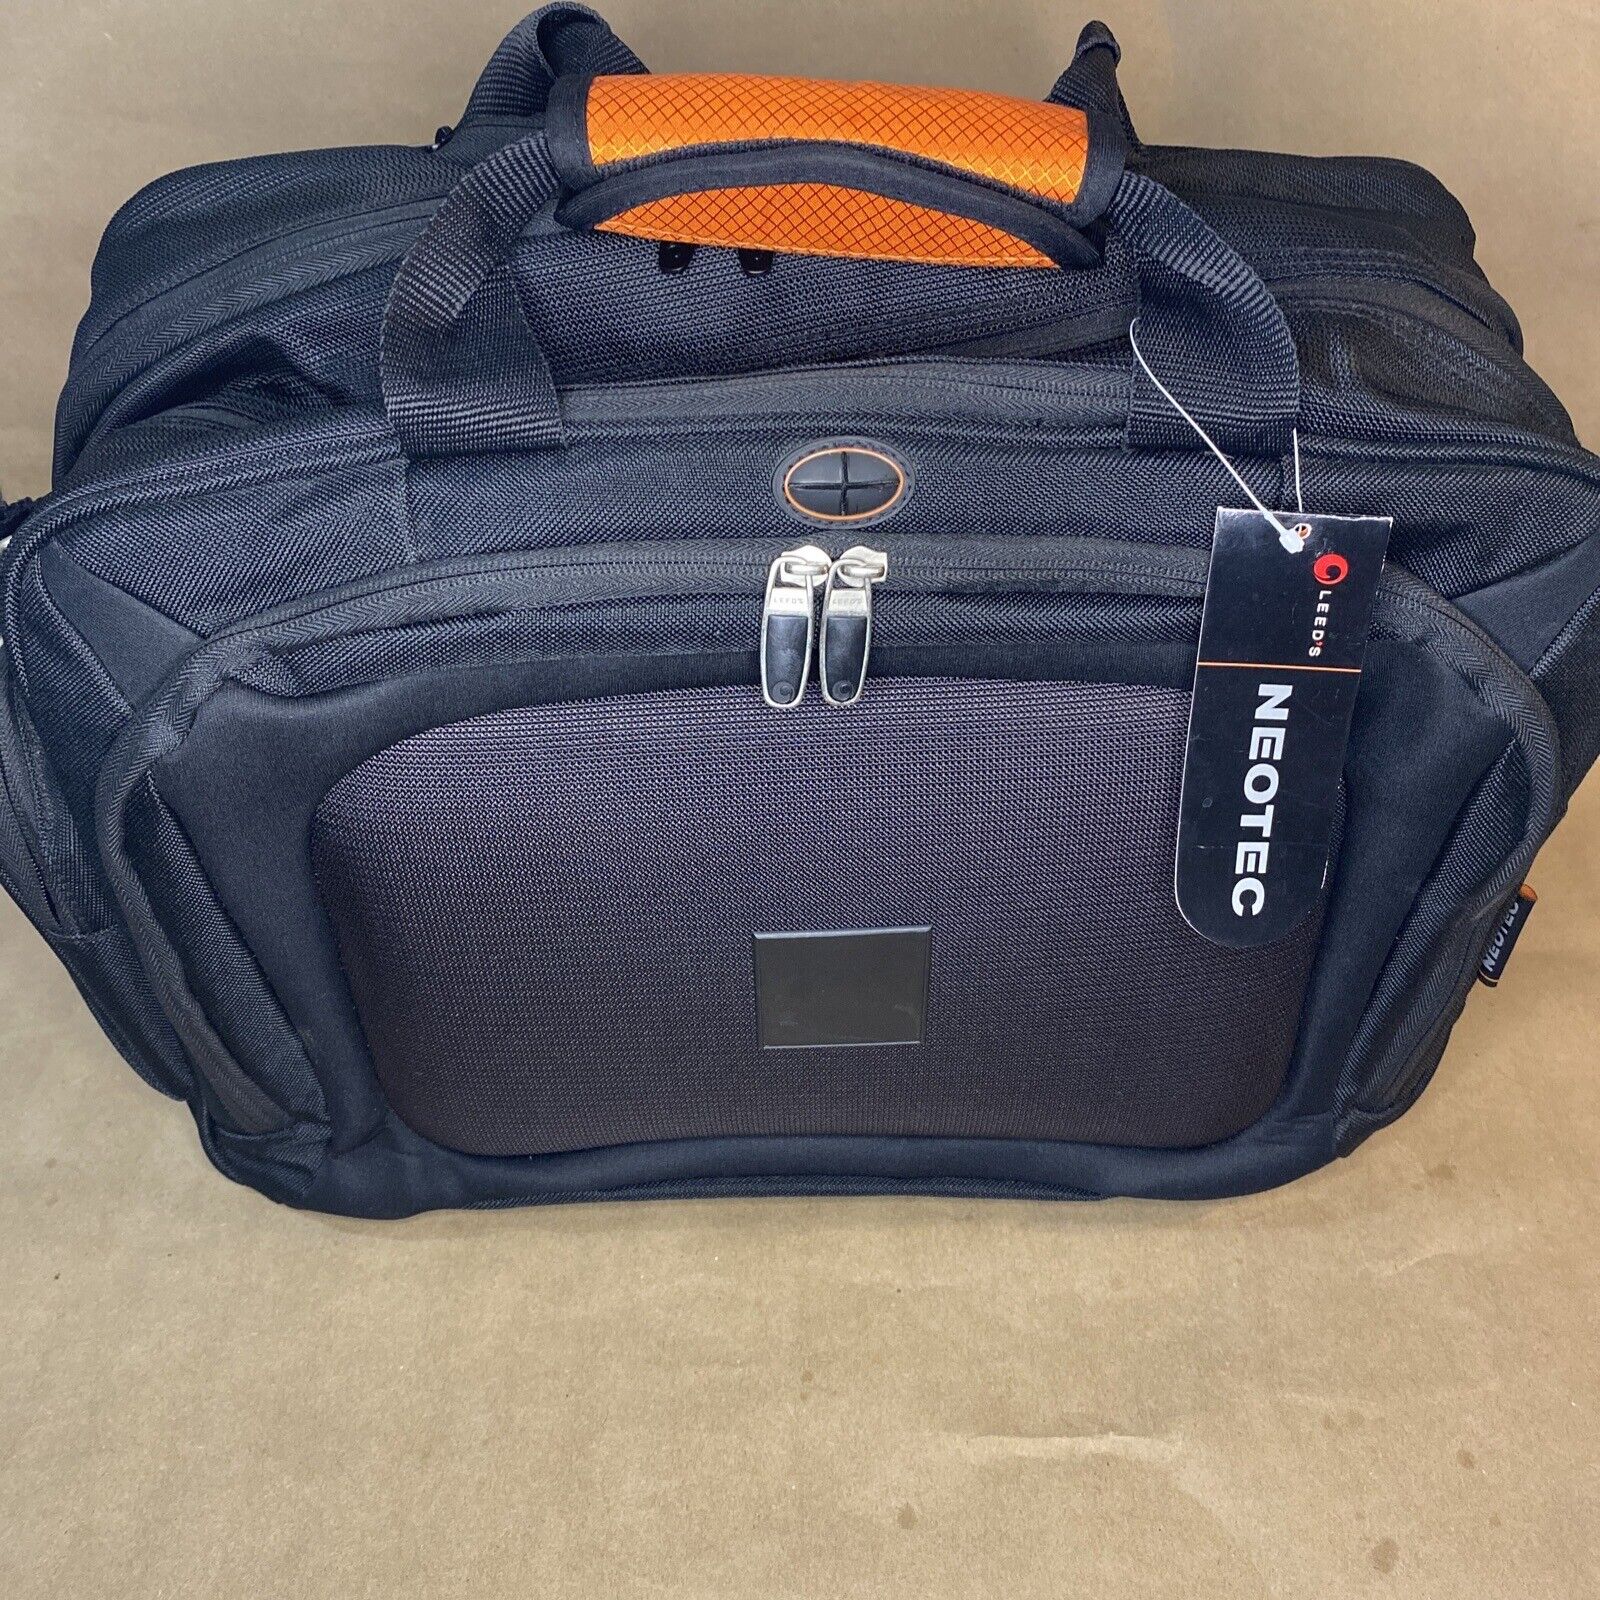 Laptop Bag Deluxe Wheeled Padded Storage Leeds Neotec 1900-90 Compu-Attaché